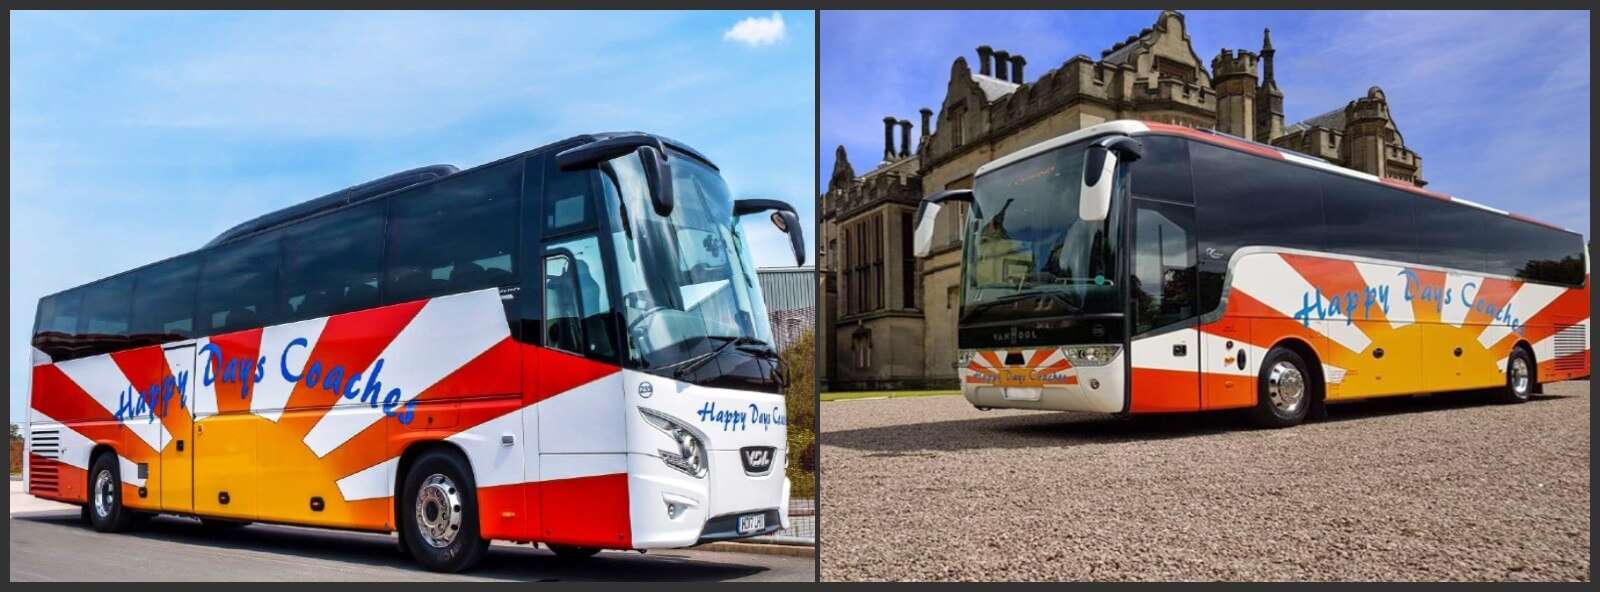 london coach trips from stoke on trent